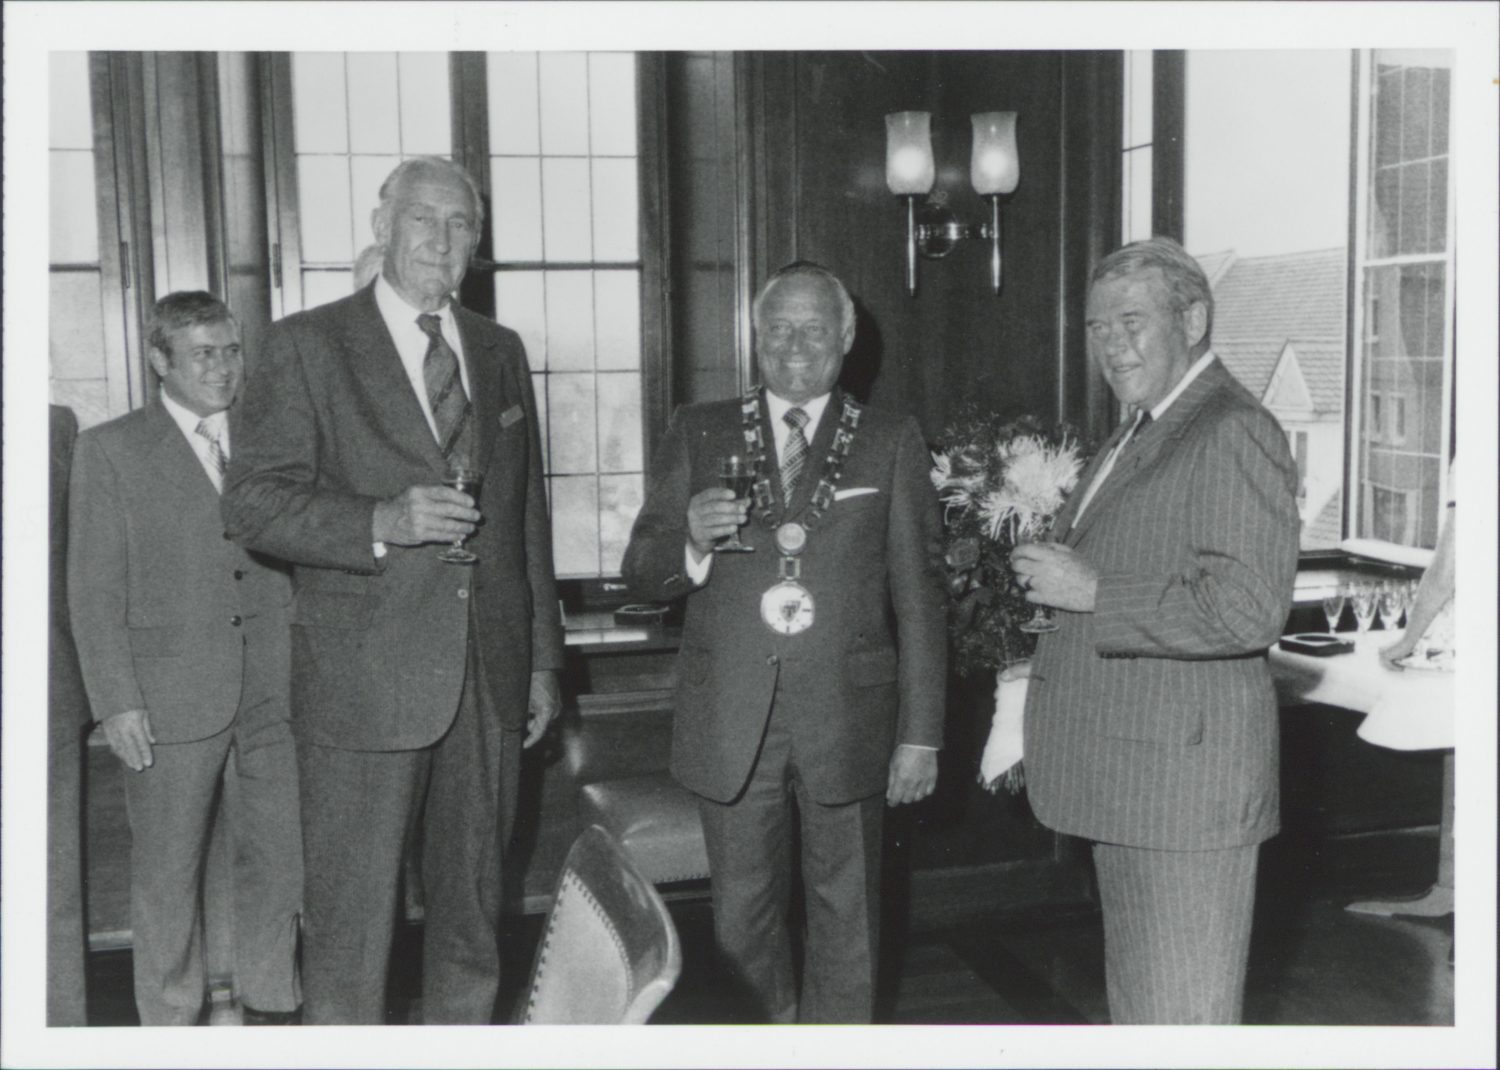 Photo of Bill Hewlett (right) and Dave Packard (left) with Boblingen's Lord Mayor (center) at the Medal of Honor ceremony.